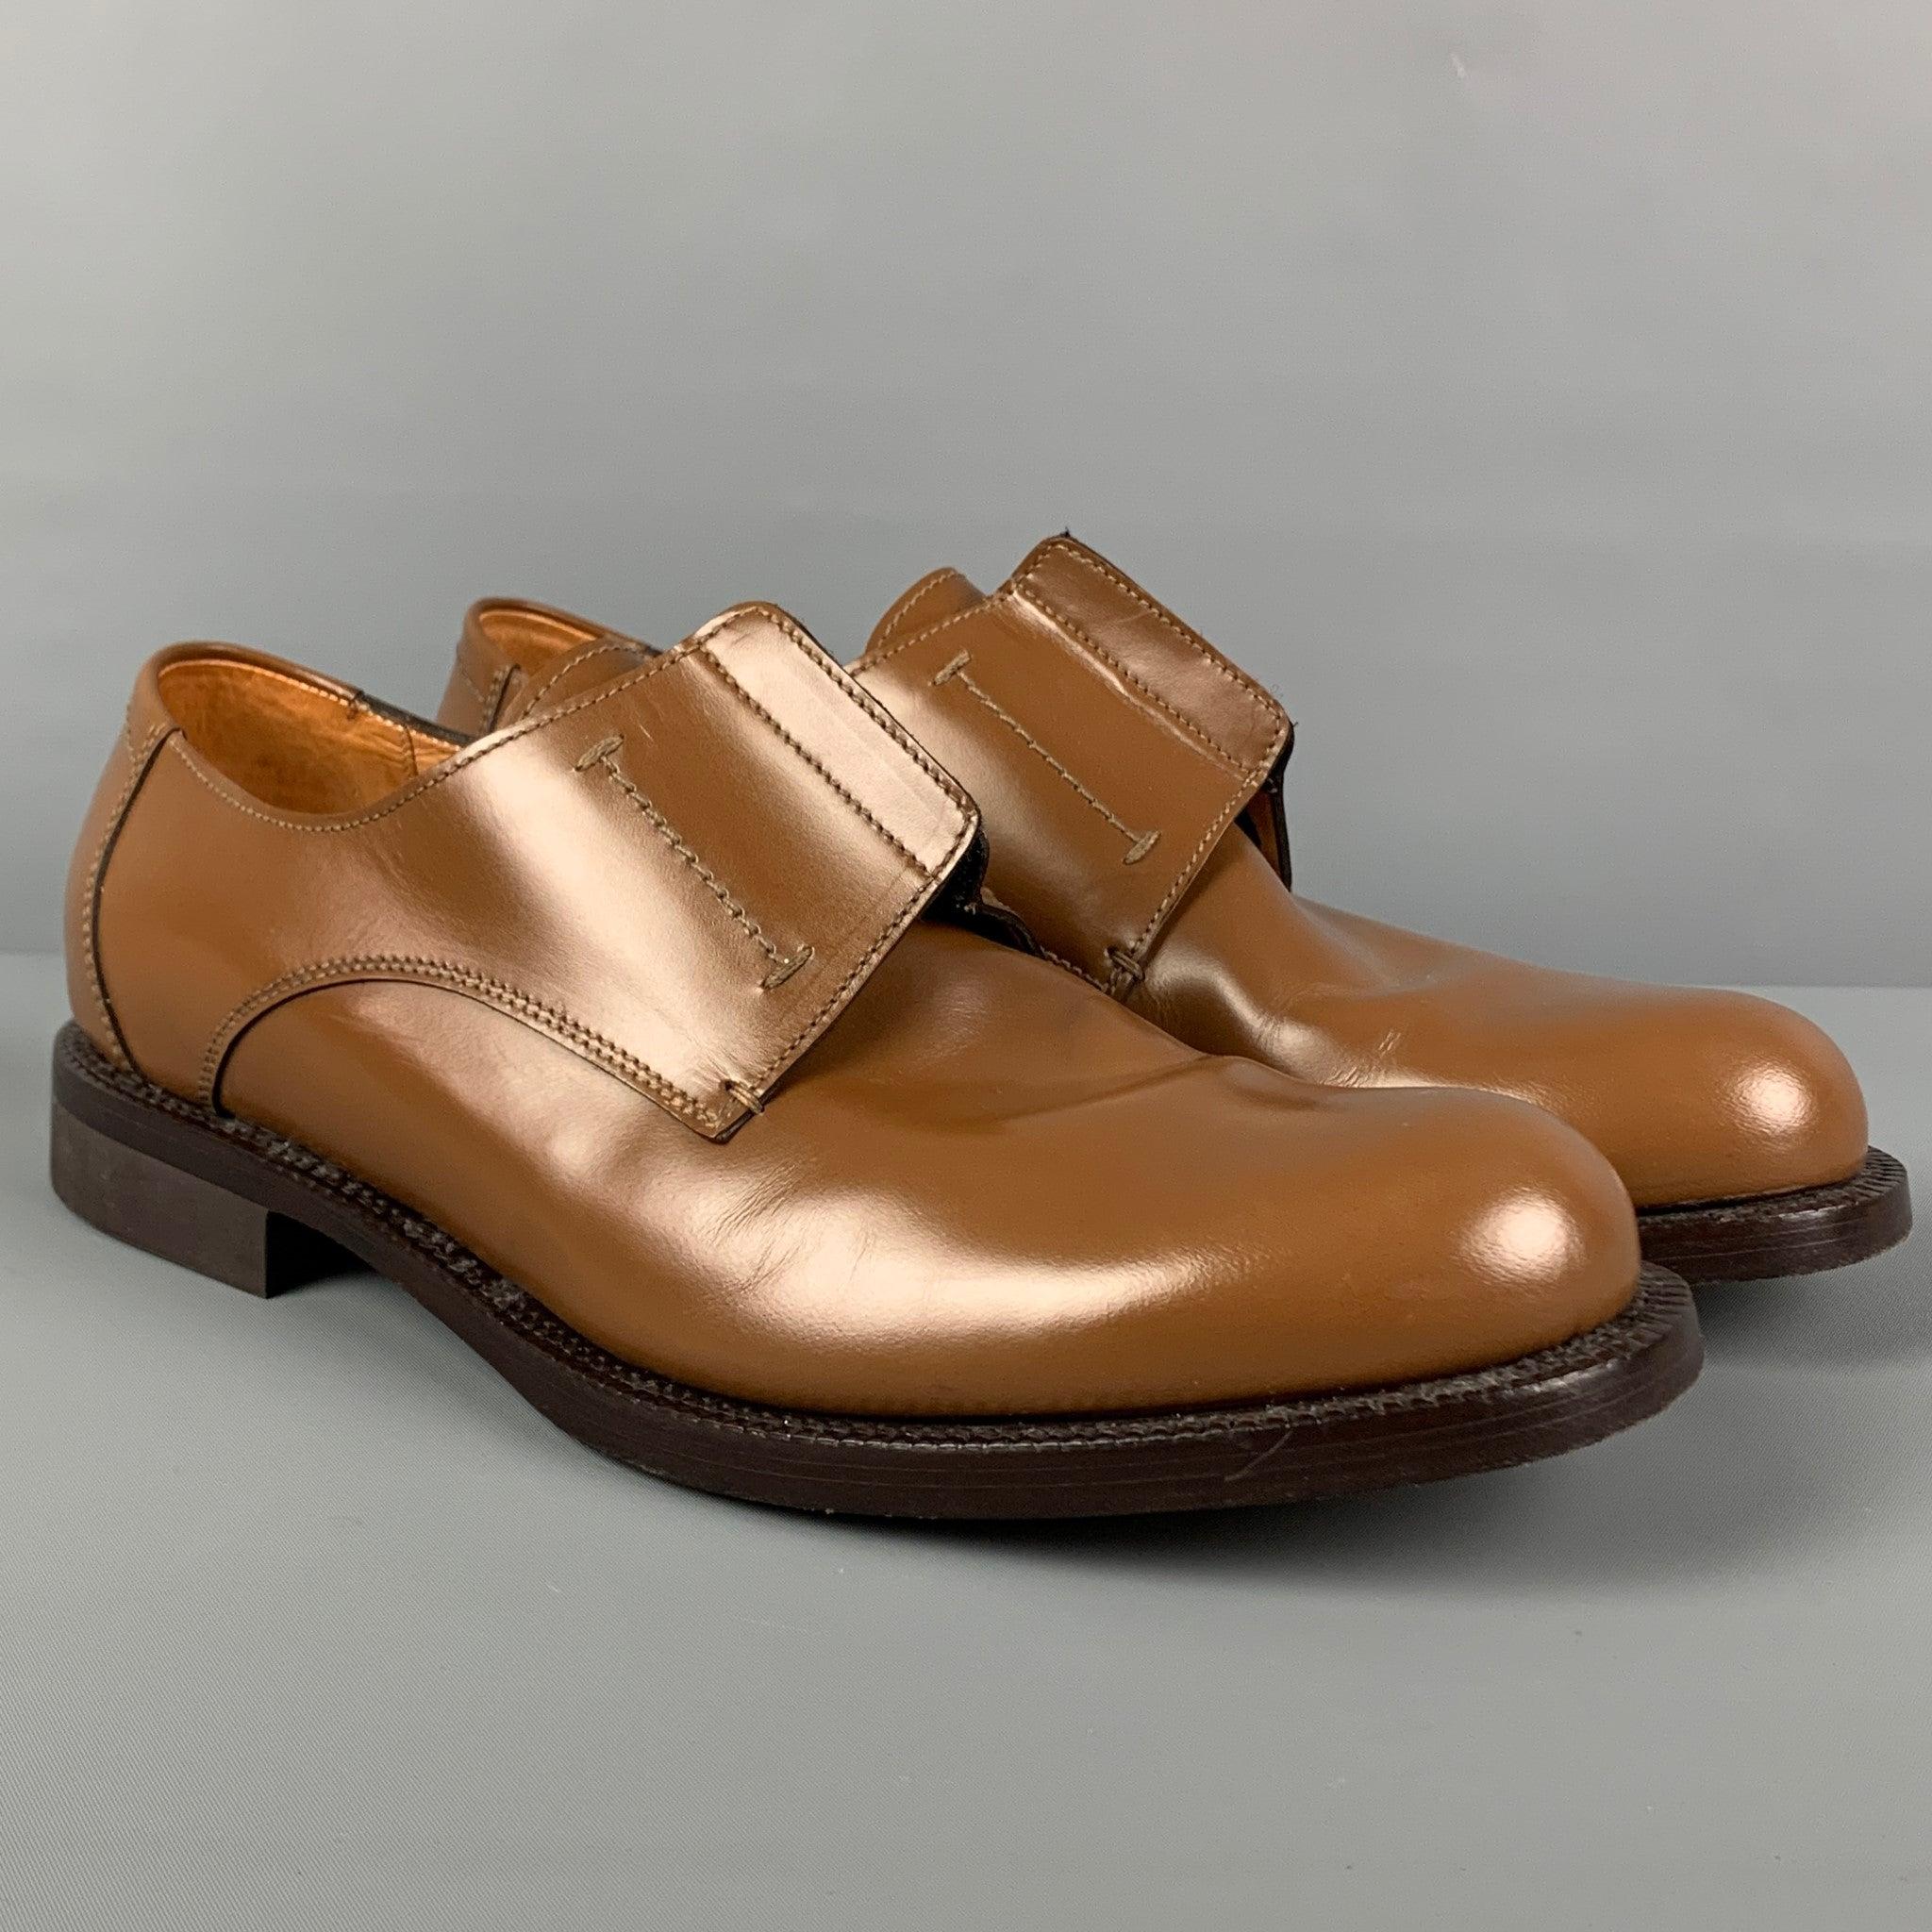 JIL SANDER x RAF SIMONS dress shoes comes in a tan leather featuring a elastic detail, round toe, and a laceless closure. Made in Italy.
Very Good
Pre-Owned Condition. 

Marked:   1 0029 10Outsole: 12.75 inches  x 4.5 inches 
  
  
 
Reference: